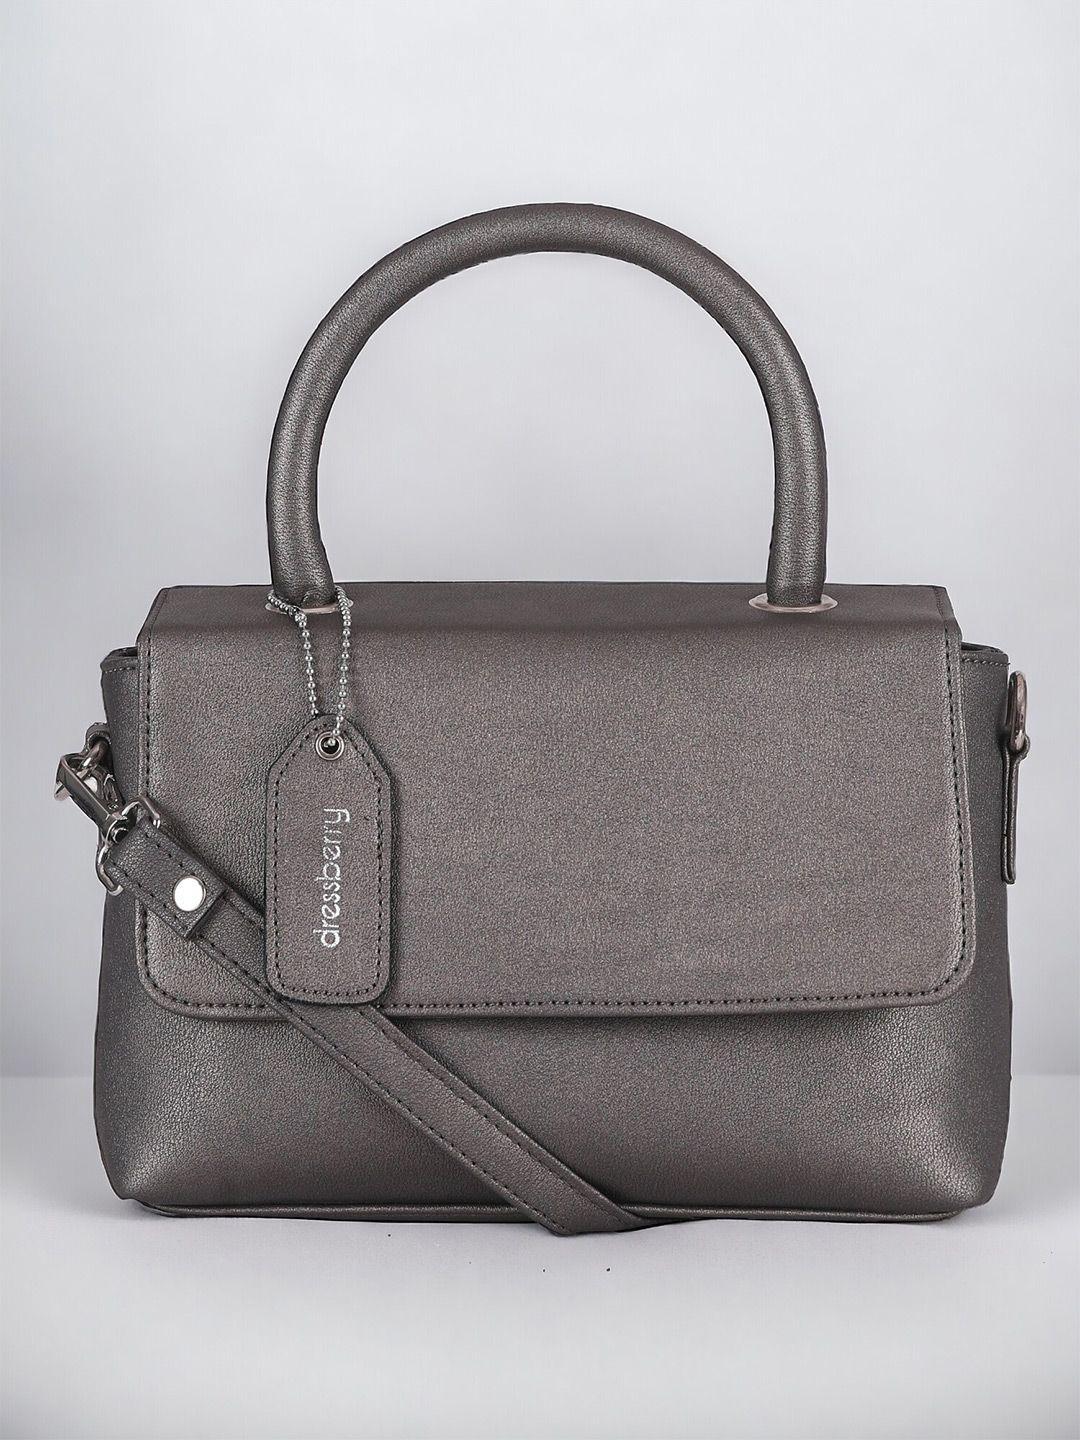 dressberry silver-toned textured structured satchel